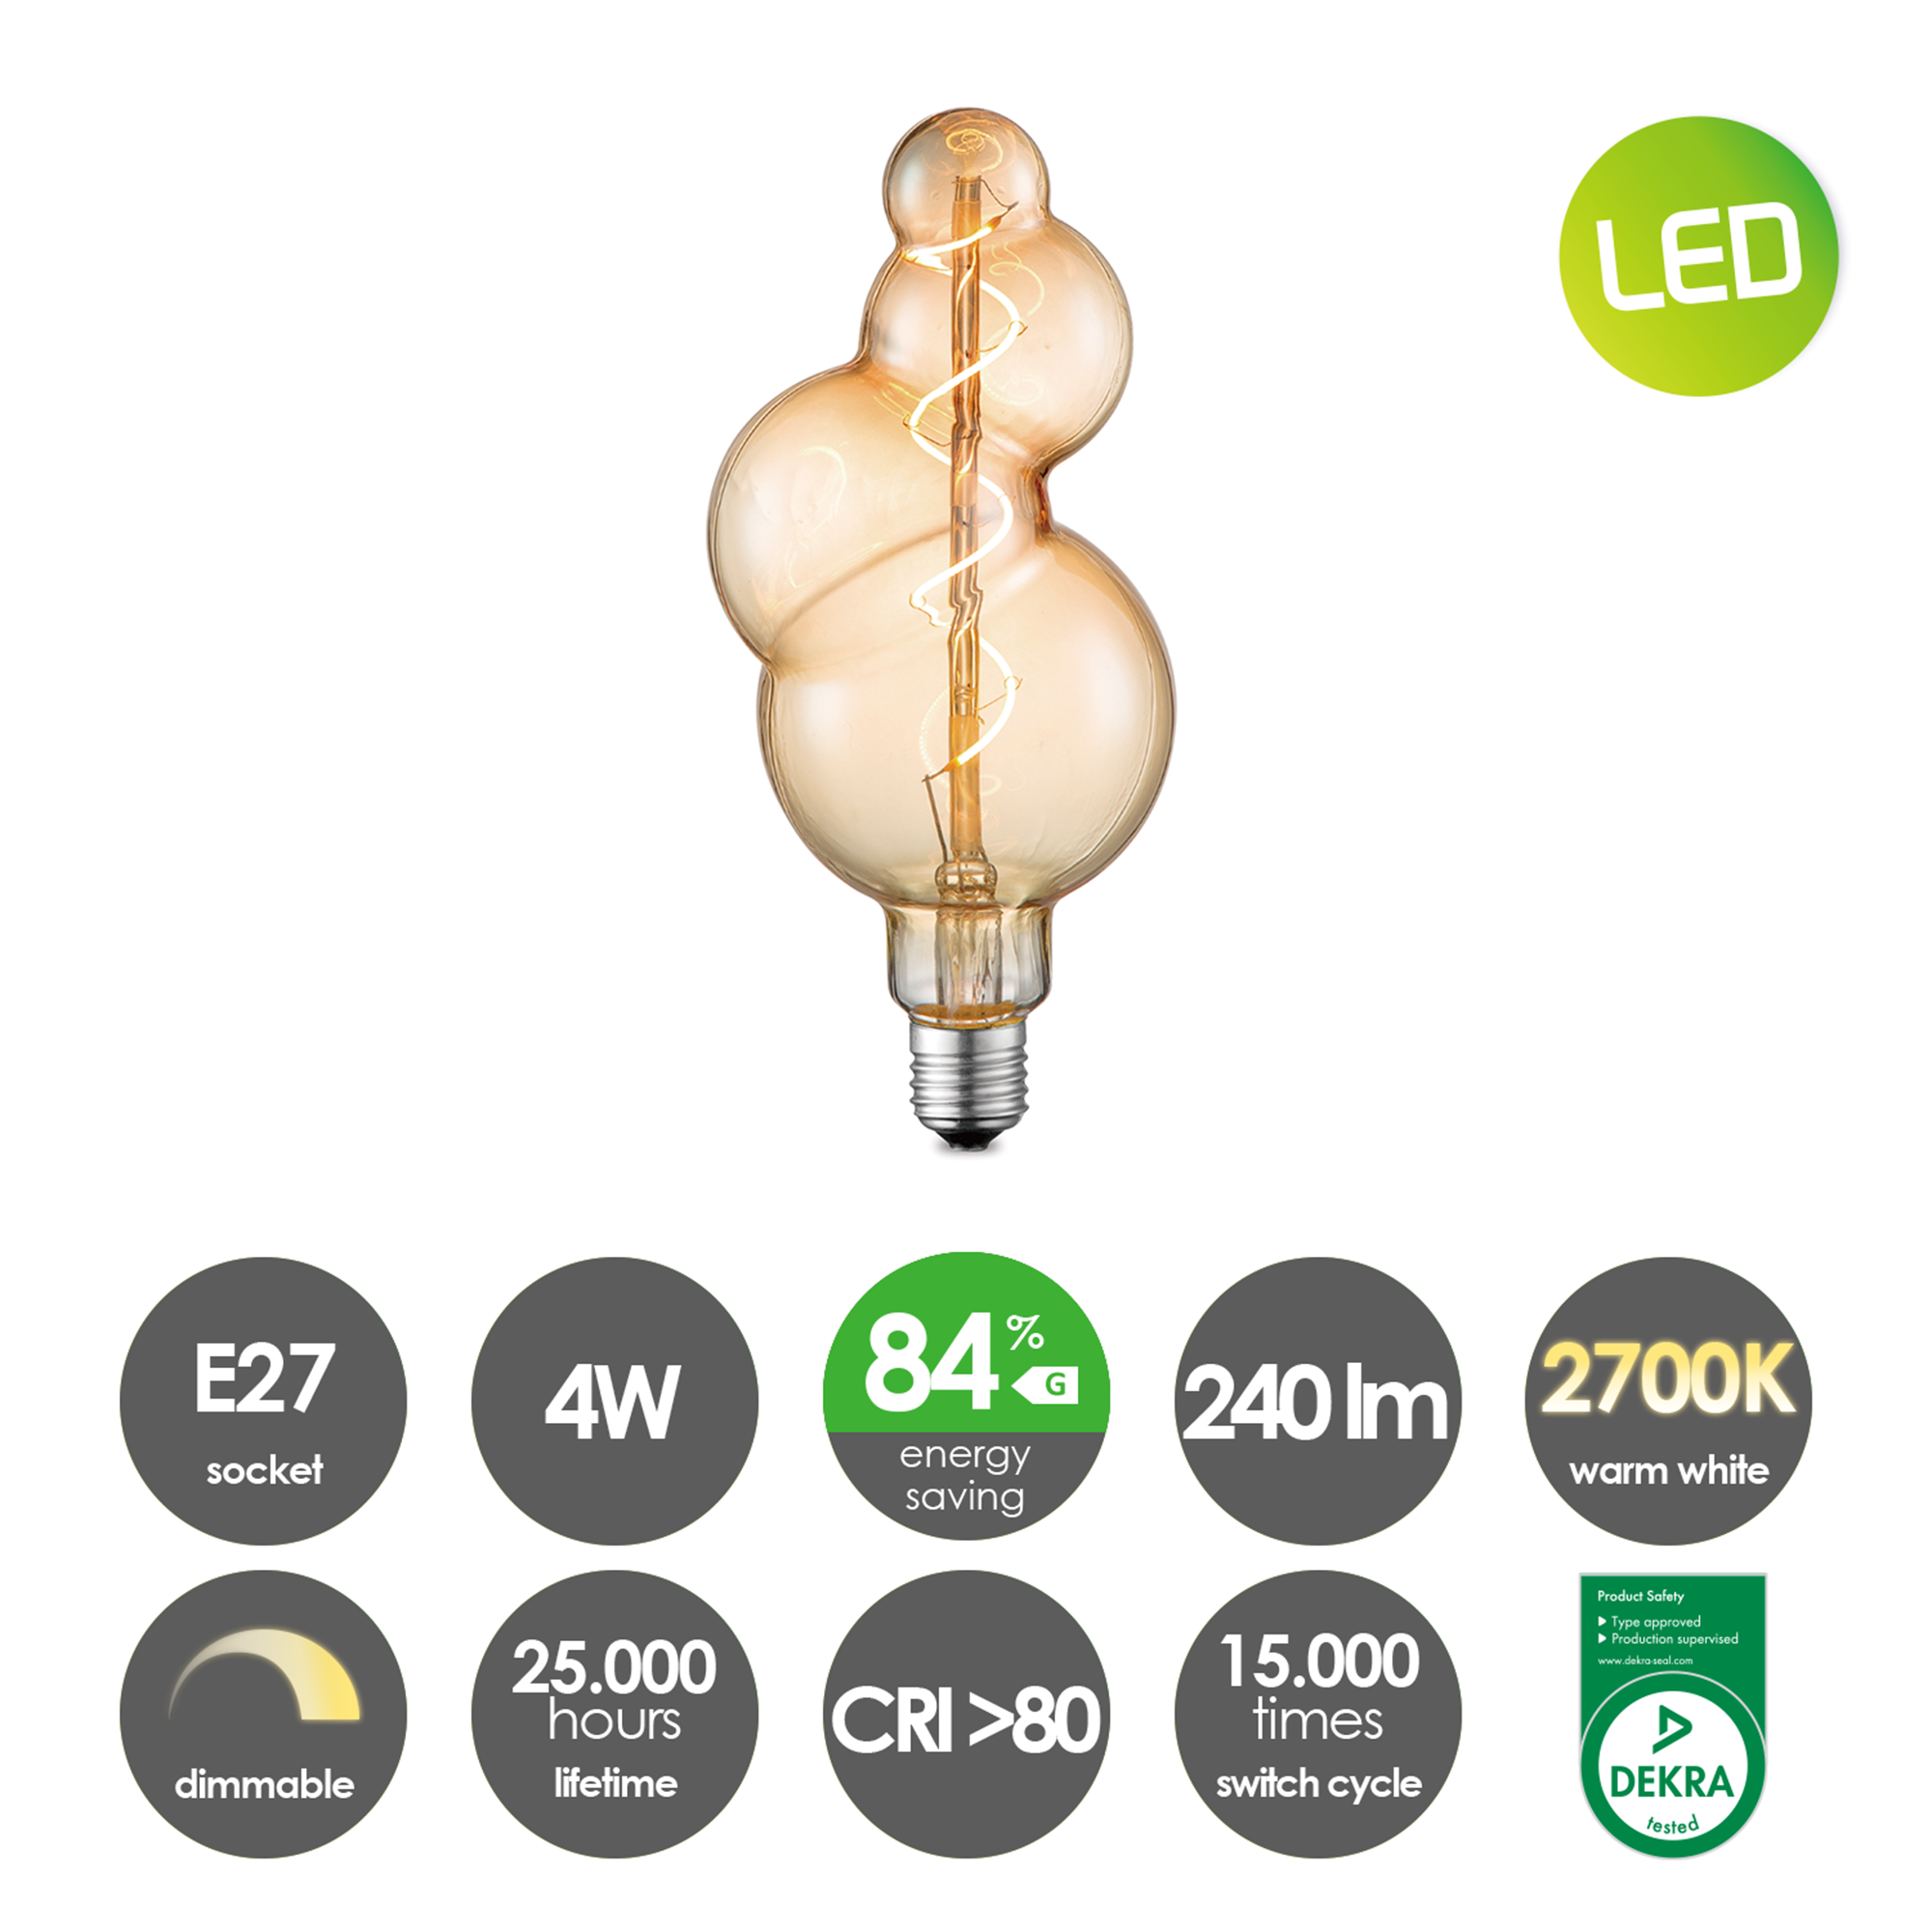 LED-Leuchtmittel 'Spiral Bubble' amber E27 4W 240 lm dimmbar + product picture